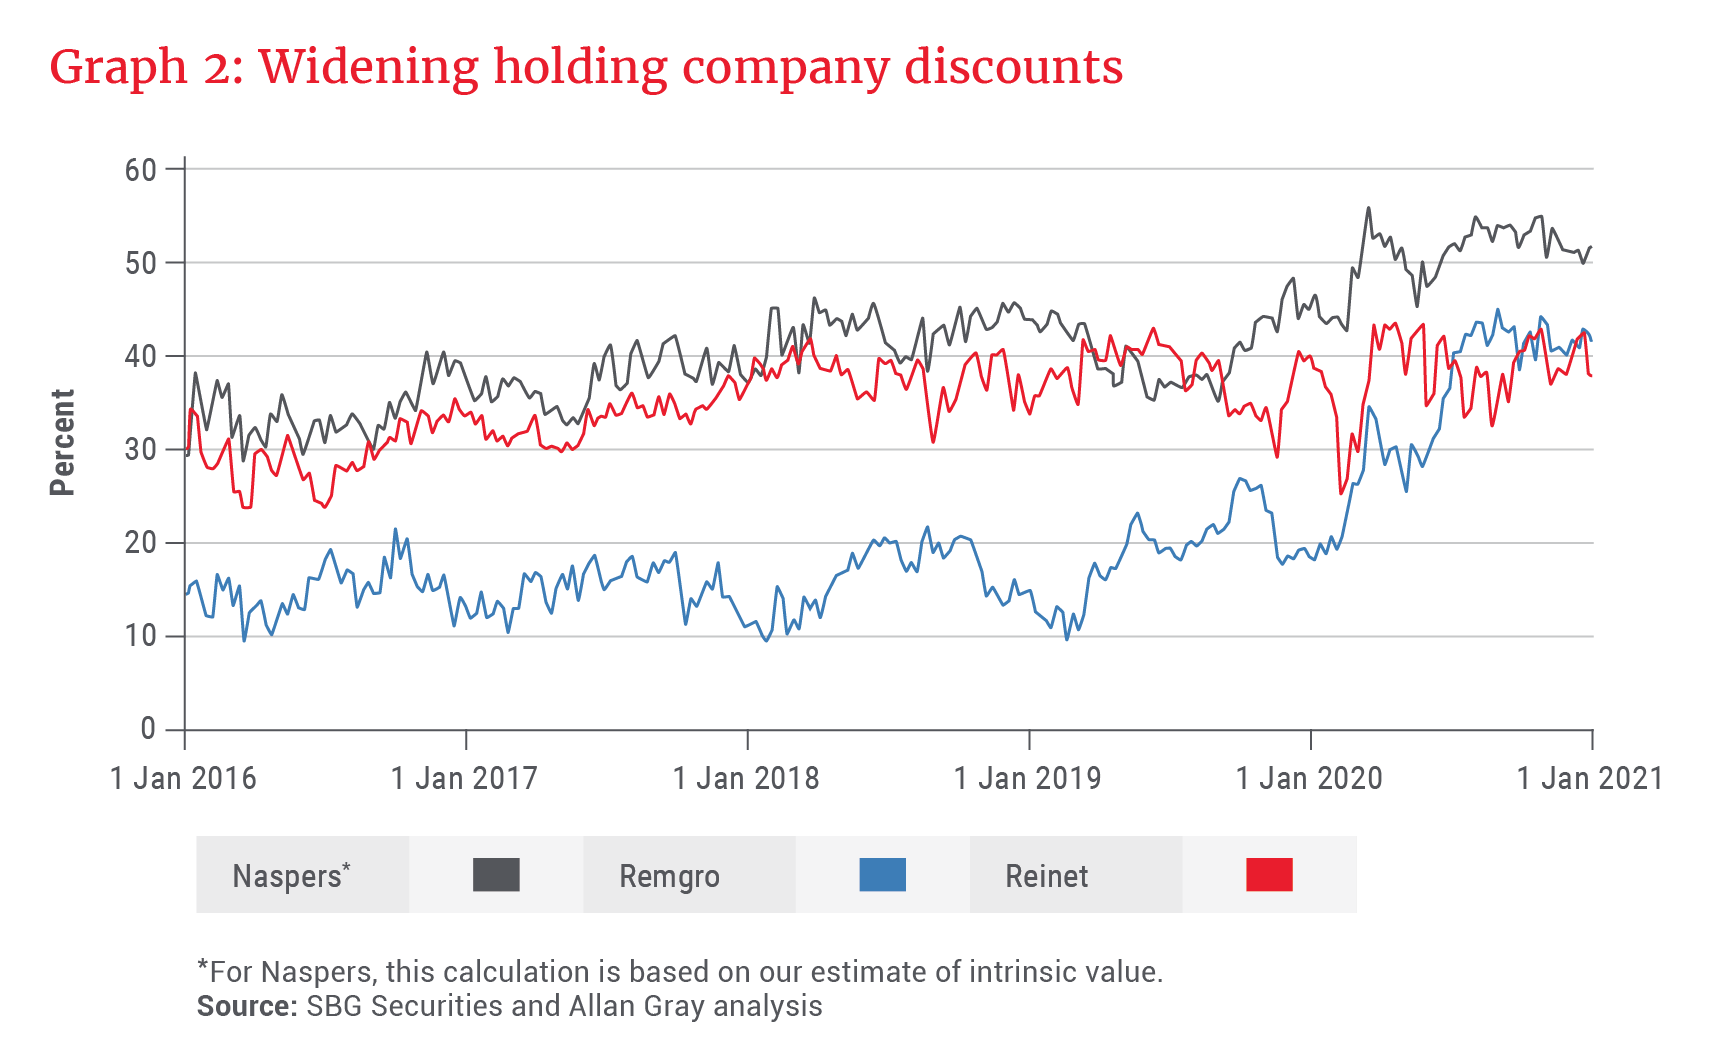 Widening holding company discounts - Allan Gray